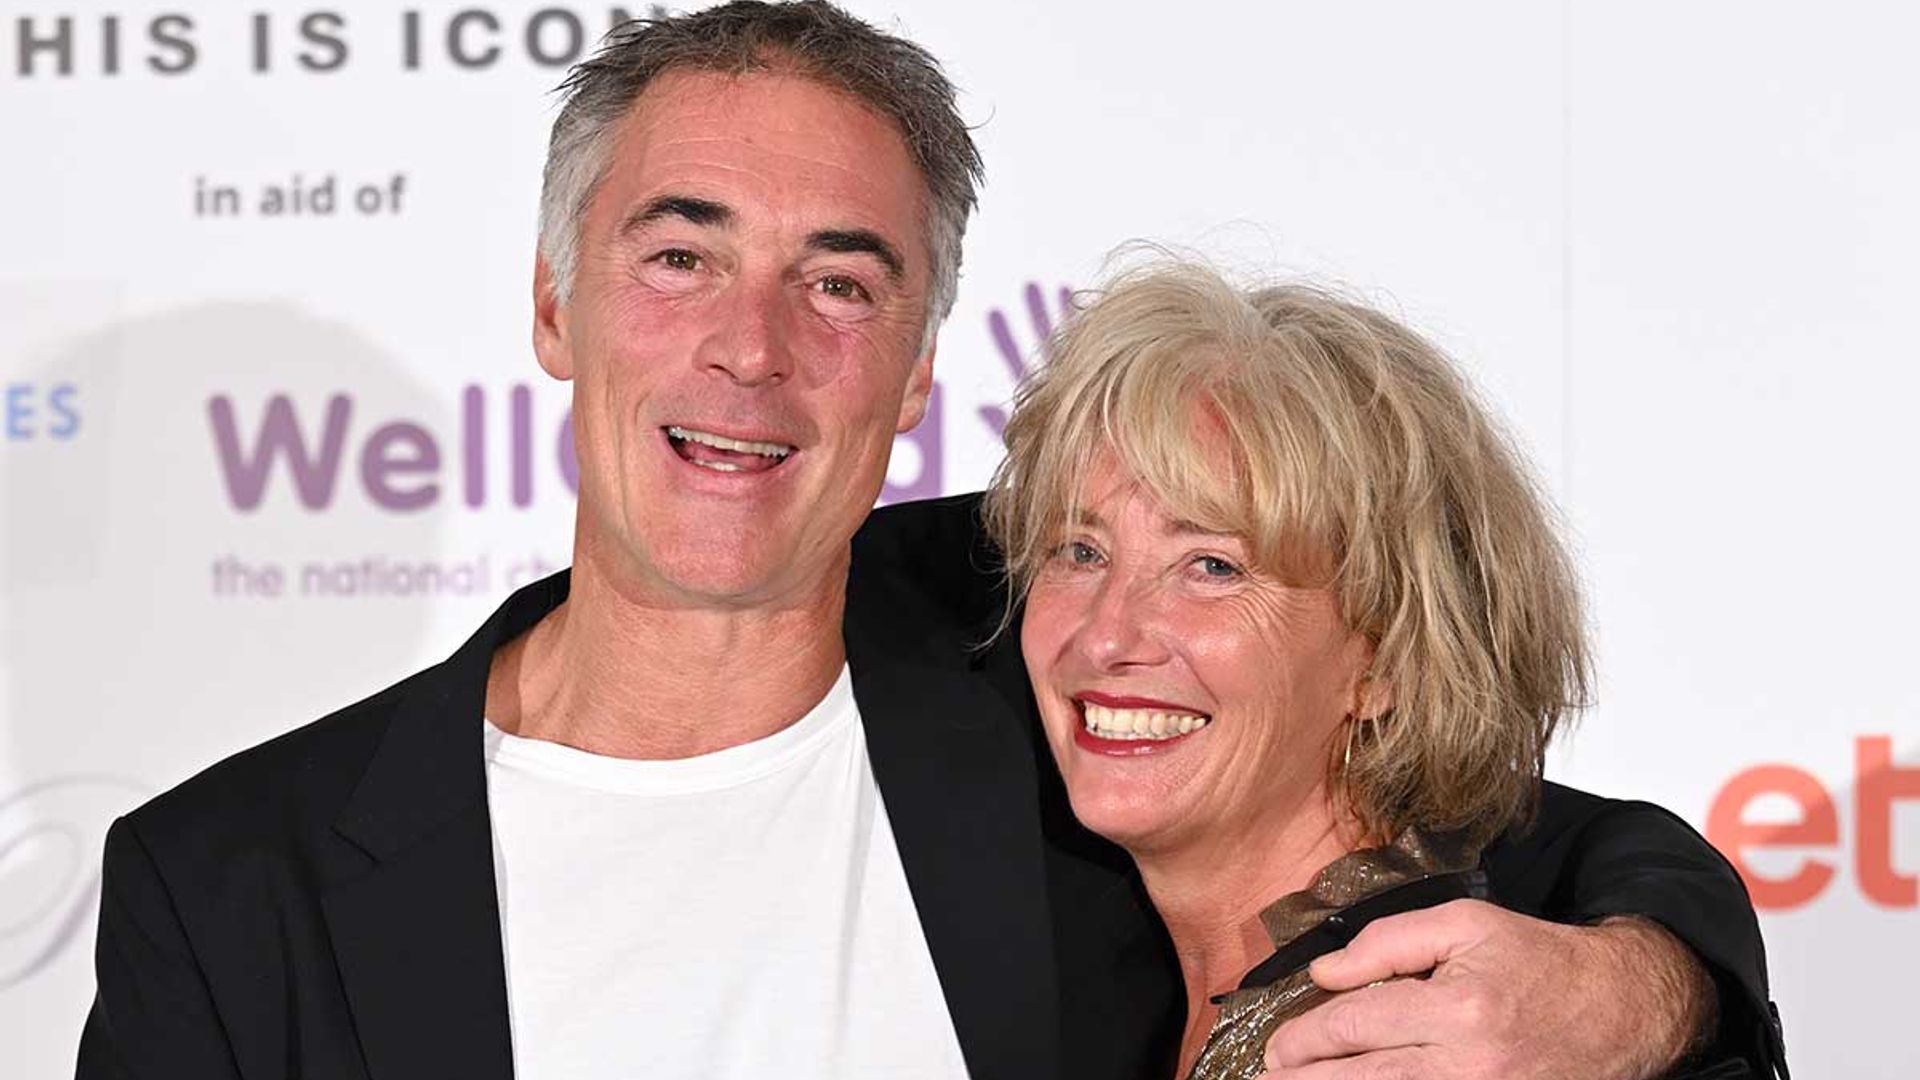 Strictly's Greg Wise reveals wife Emma Thompson 'burst into tears' for this reason